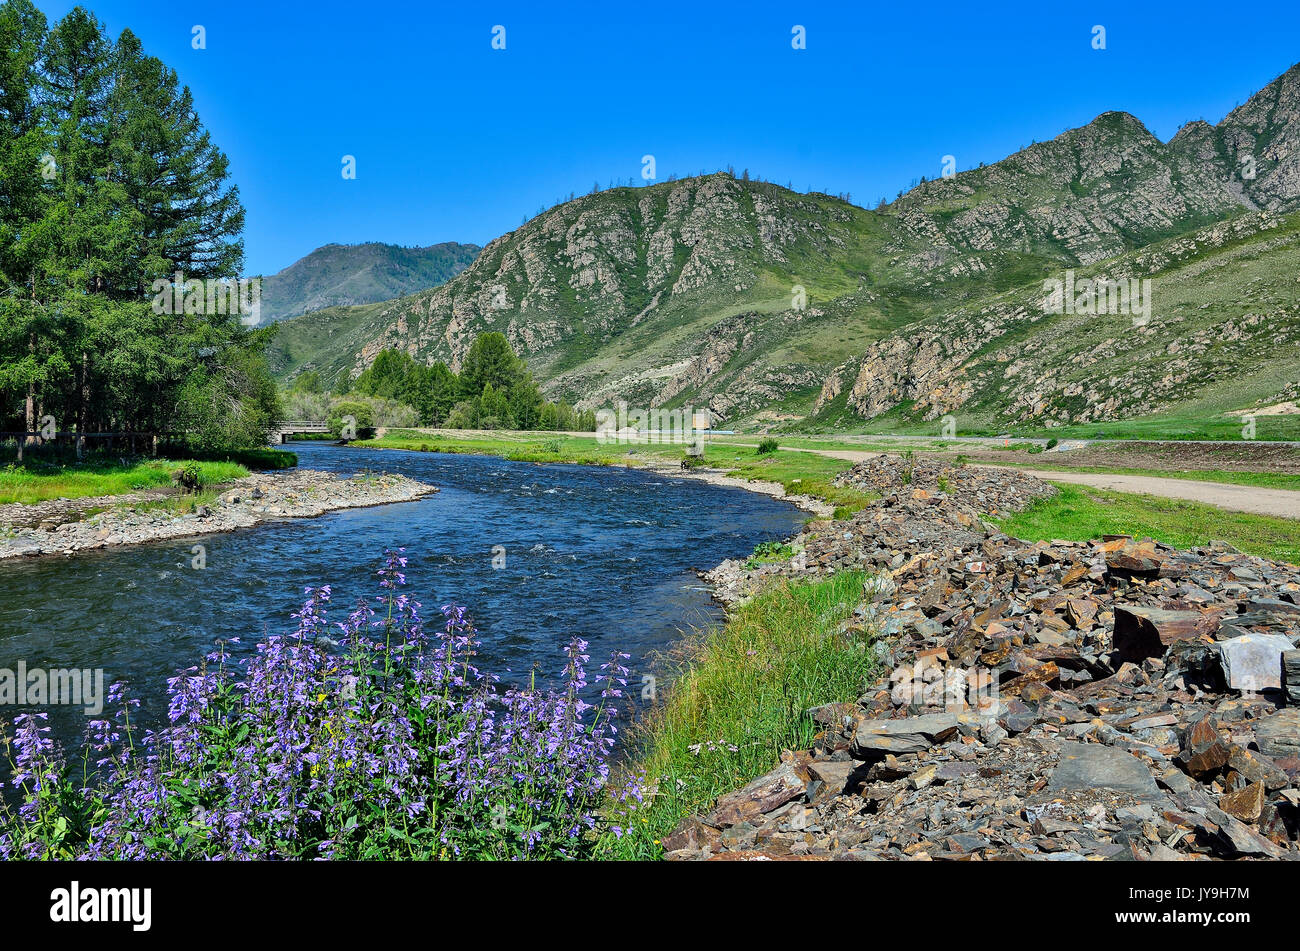 Sunny summer mountain landscape with blue flowers on the stony bank of the fast river, Mountains of Altai, Russia Stock Photo